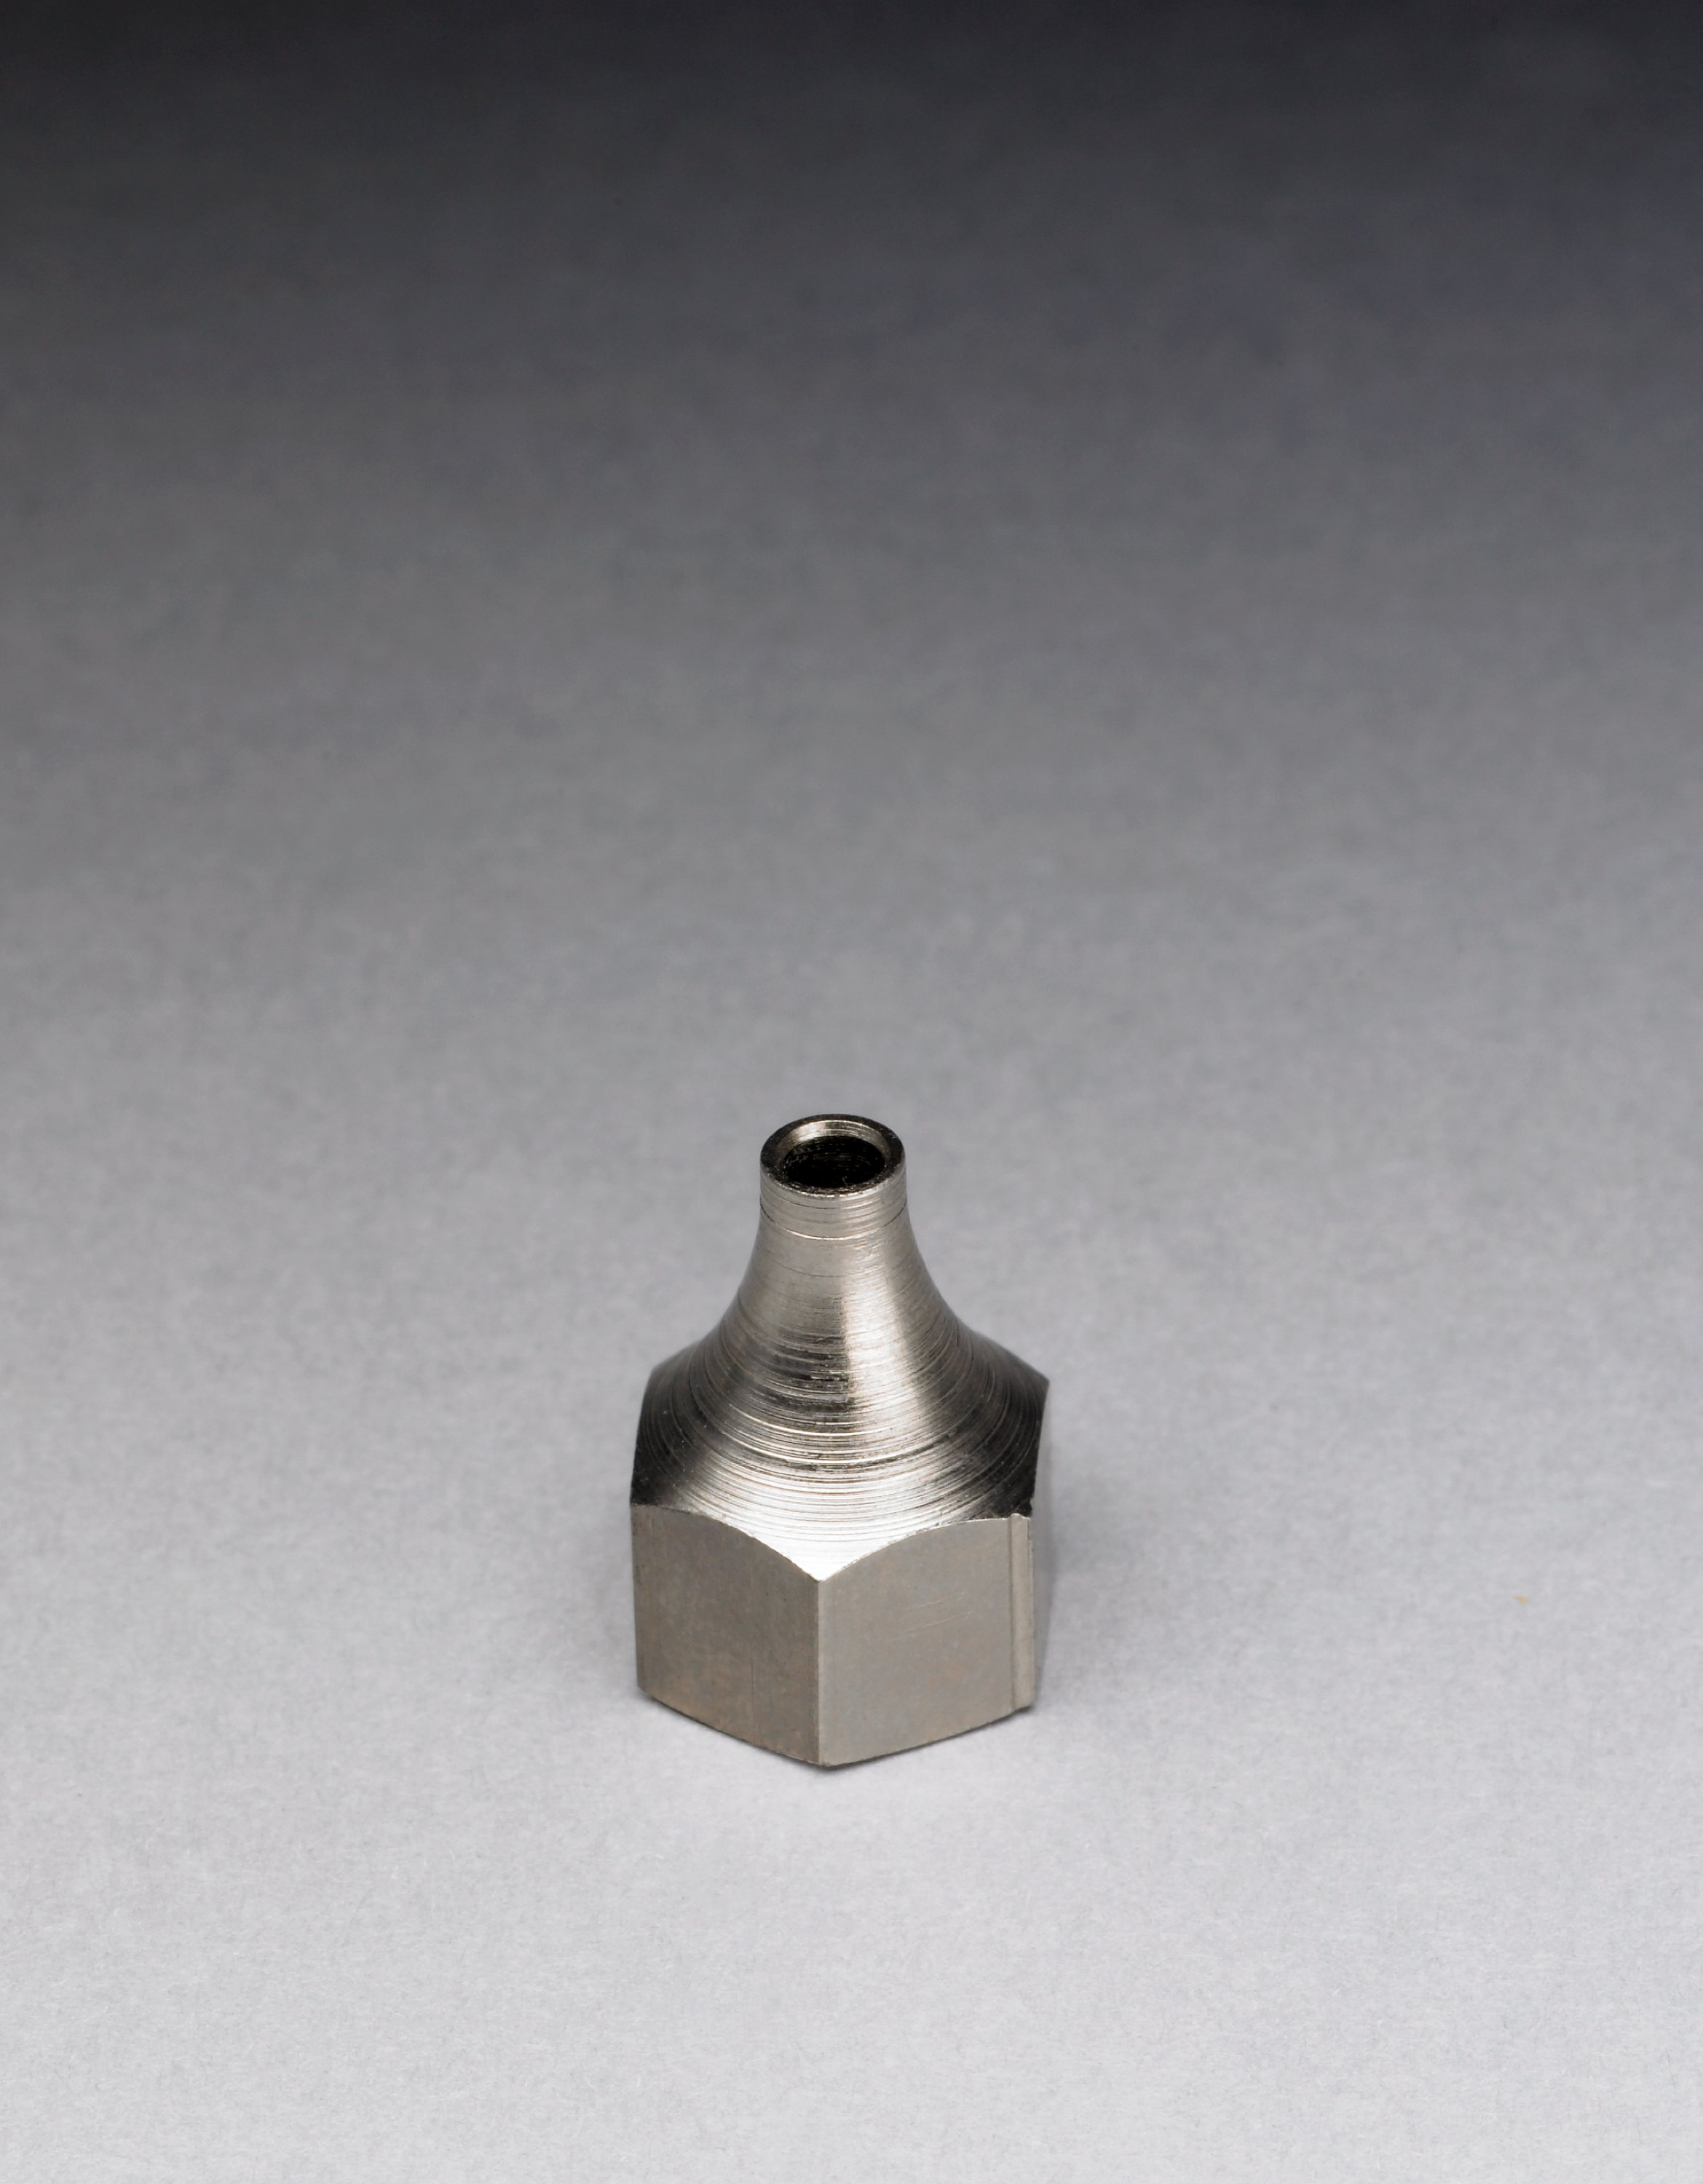 A fluted (0.125") metal tip designed for use with high viscosity hot melts.